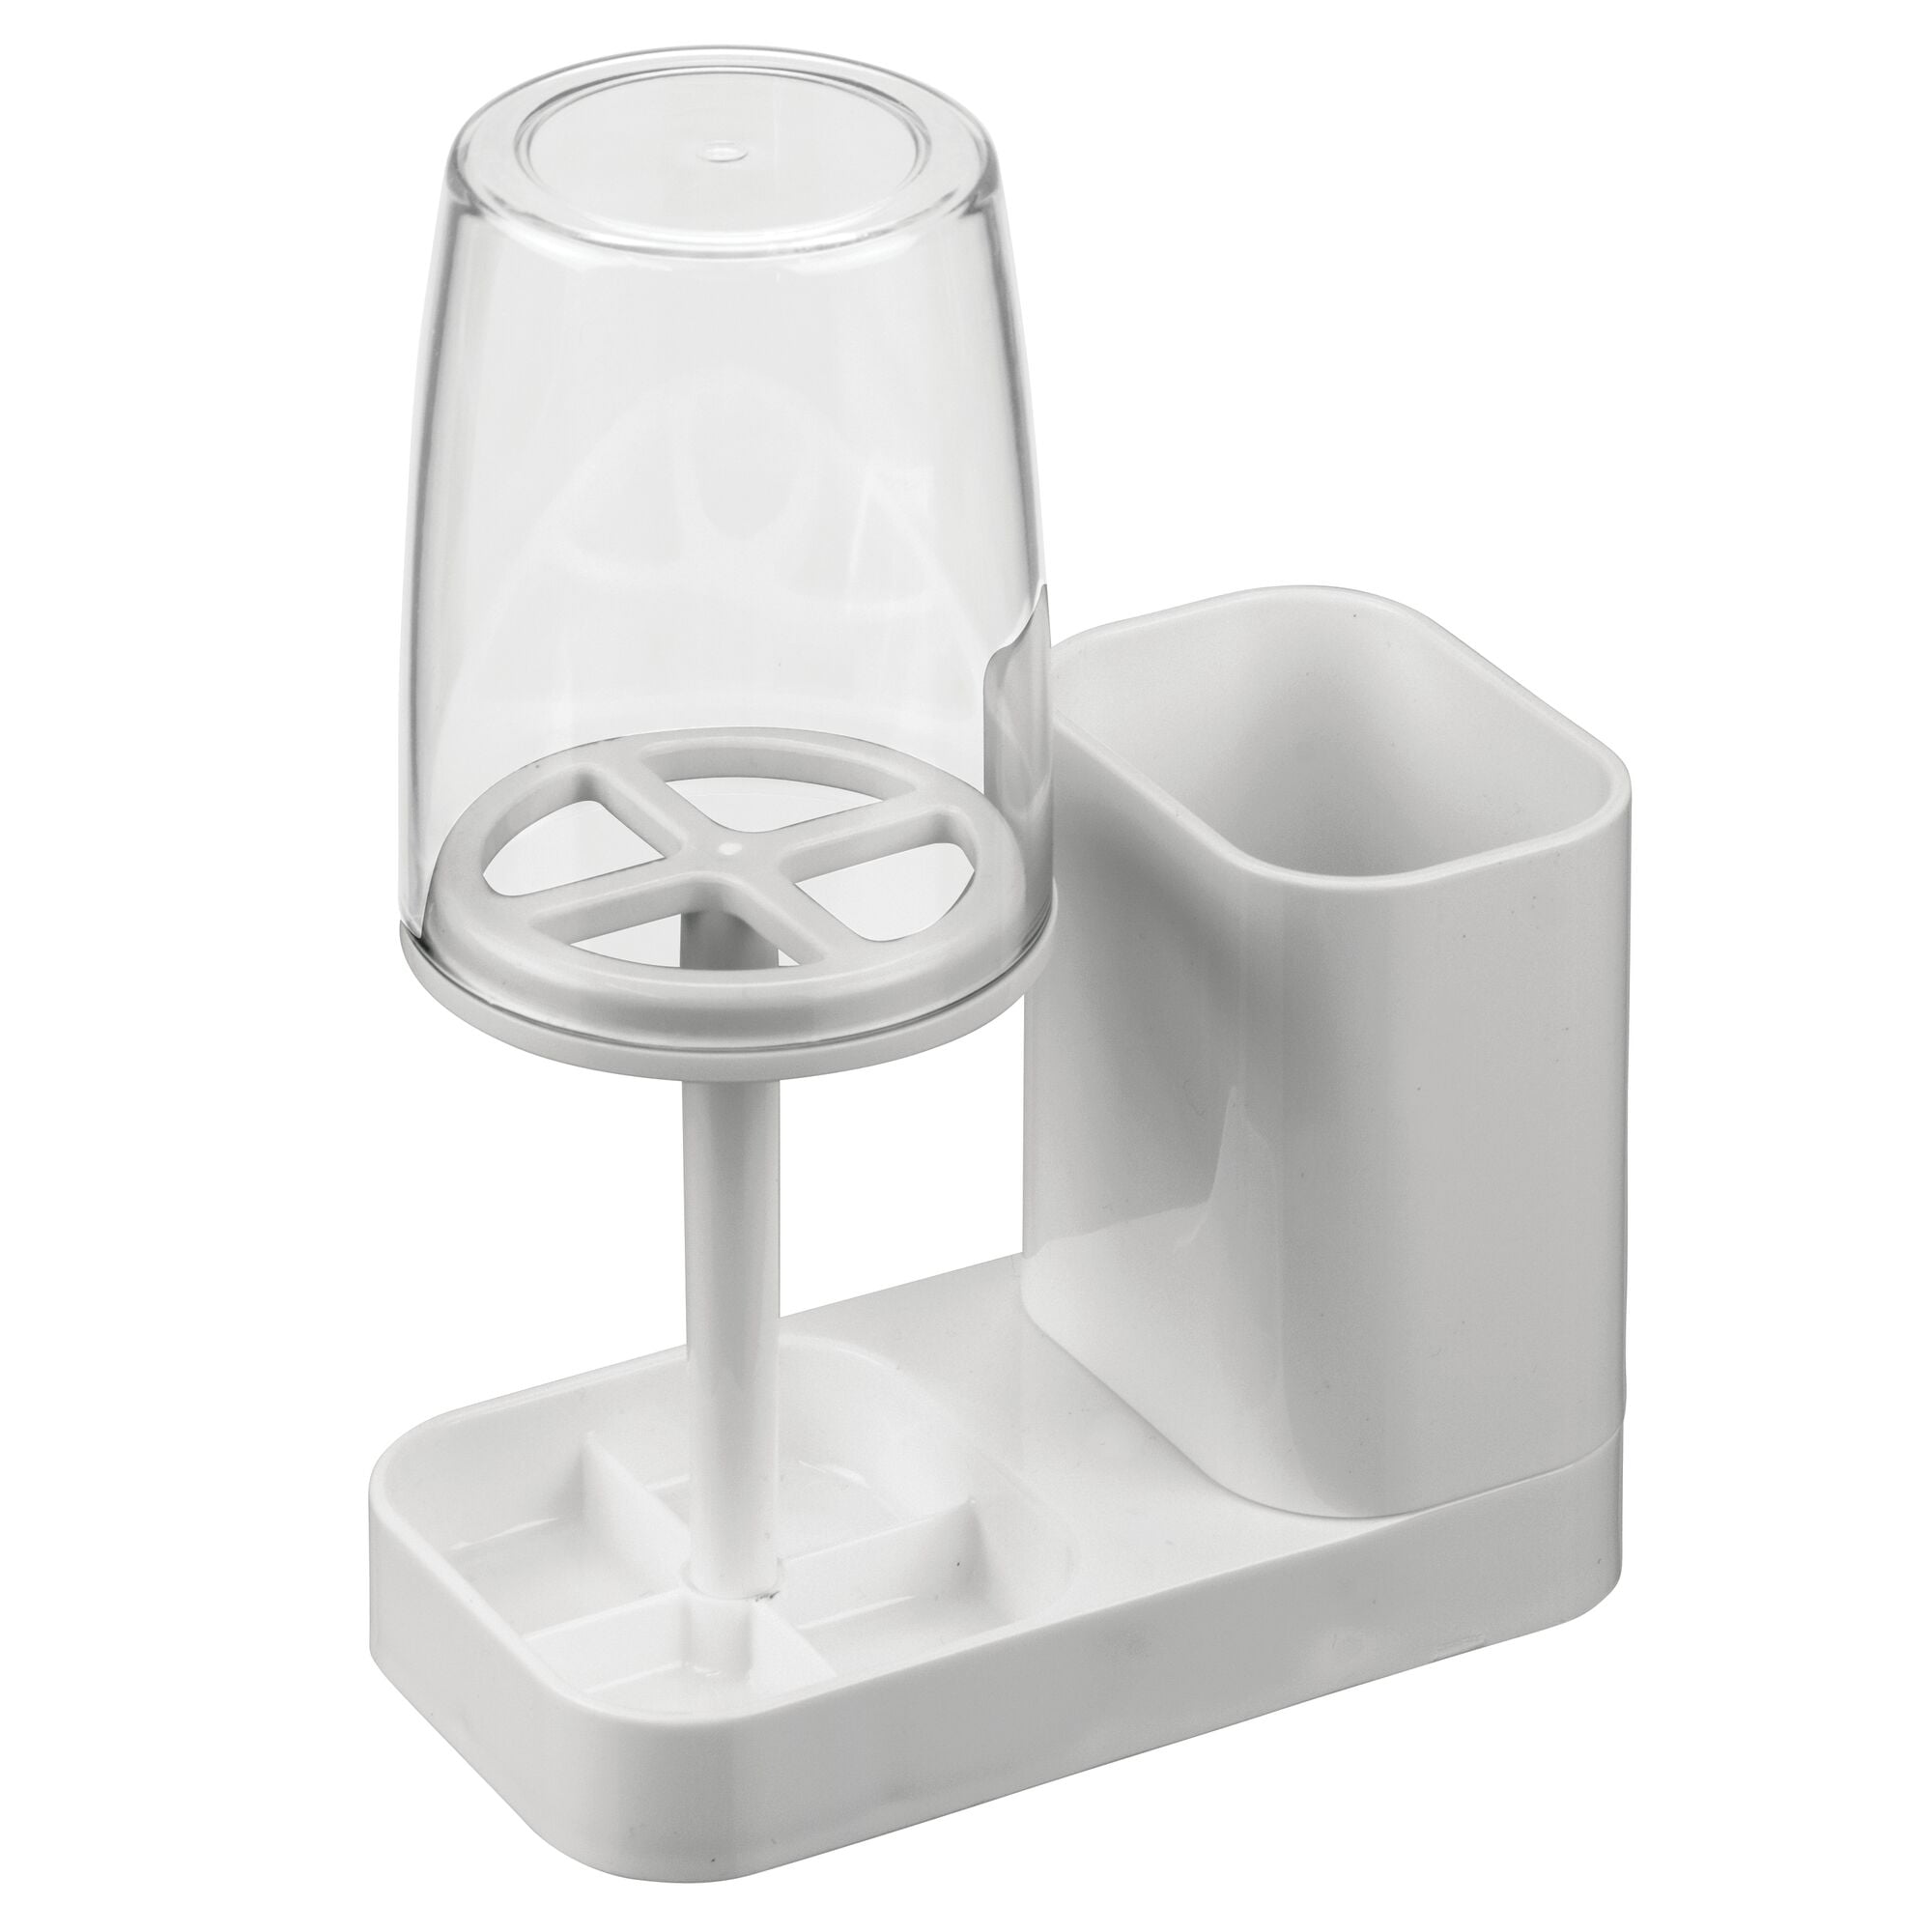 mDesign Toothpaste & Toothbrush Holder with Rinsing Cup - White/Satin/Clear  